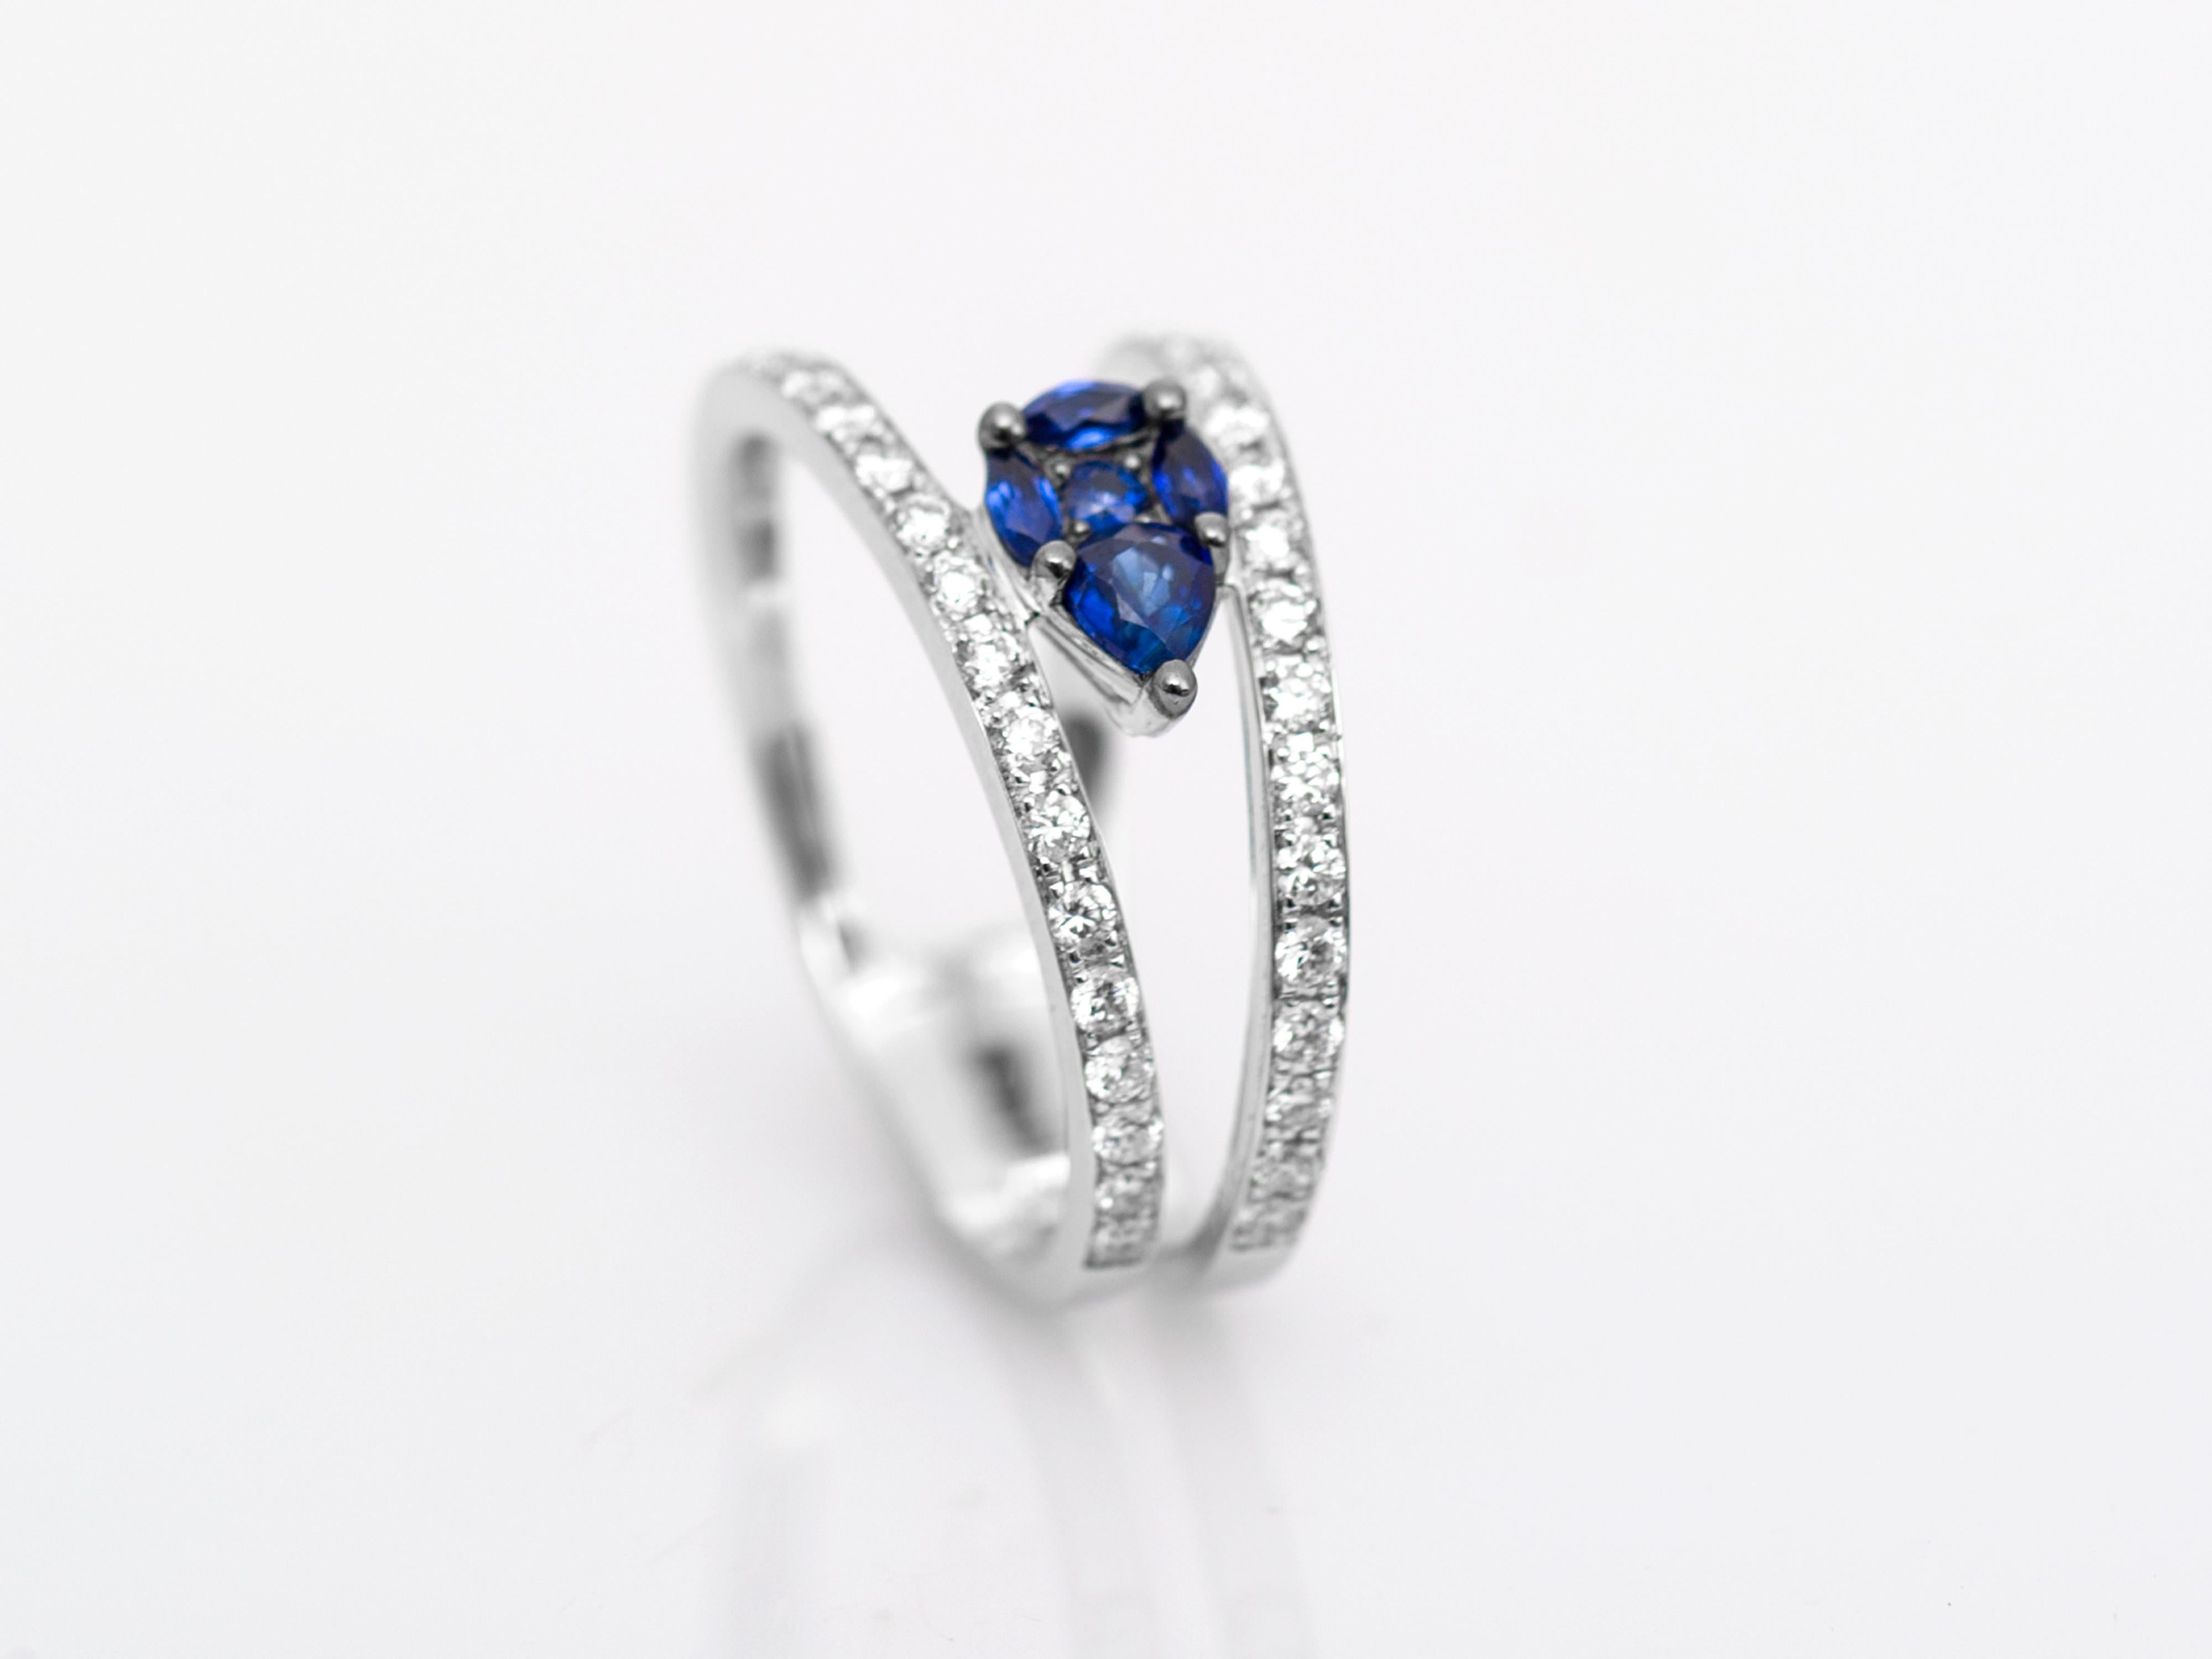 5 sapphires pavé-set in the centre to create an illusion of a larger pear shaped sapphire in-between bands of brilliant cut stones. The piece is handmade with delicacy.